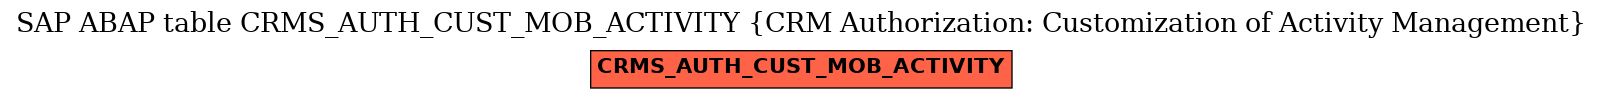 E-R Diagram for table CRMS_AUTH_CUST_MOB_ACTIVITY (CRM Authorization: Customization of Activity Management)